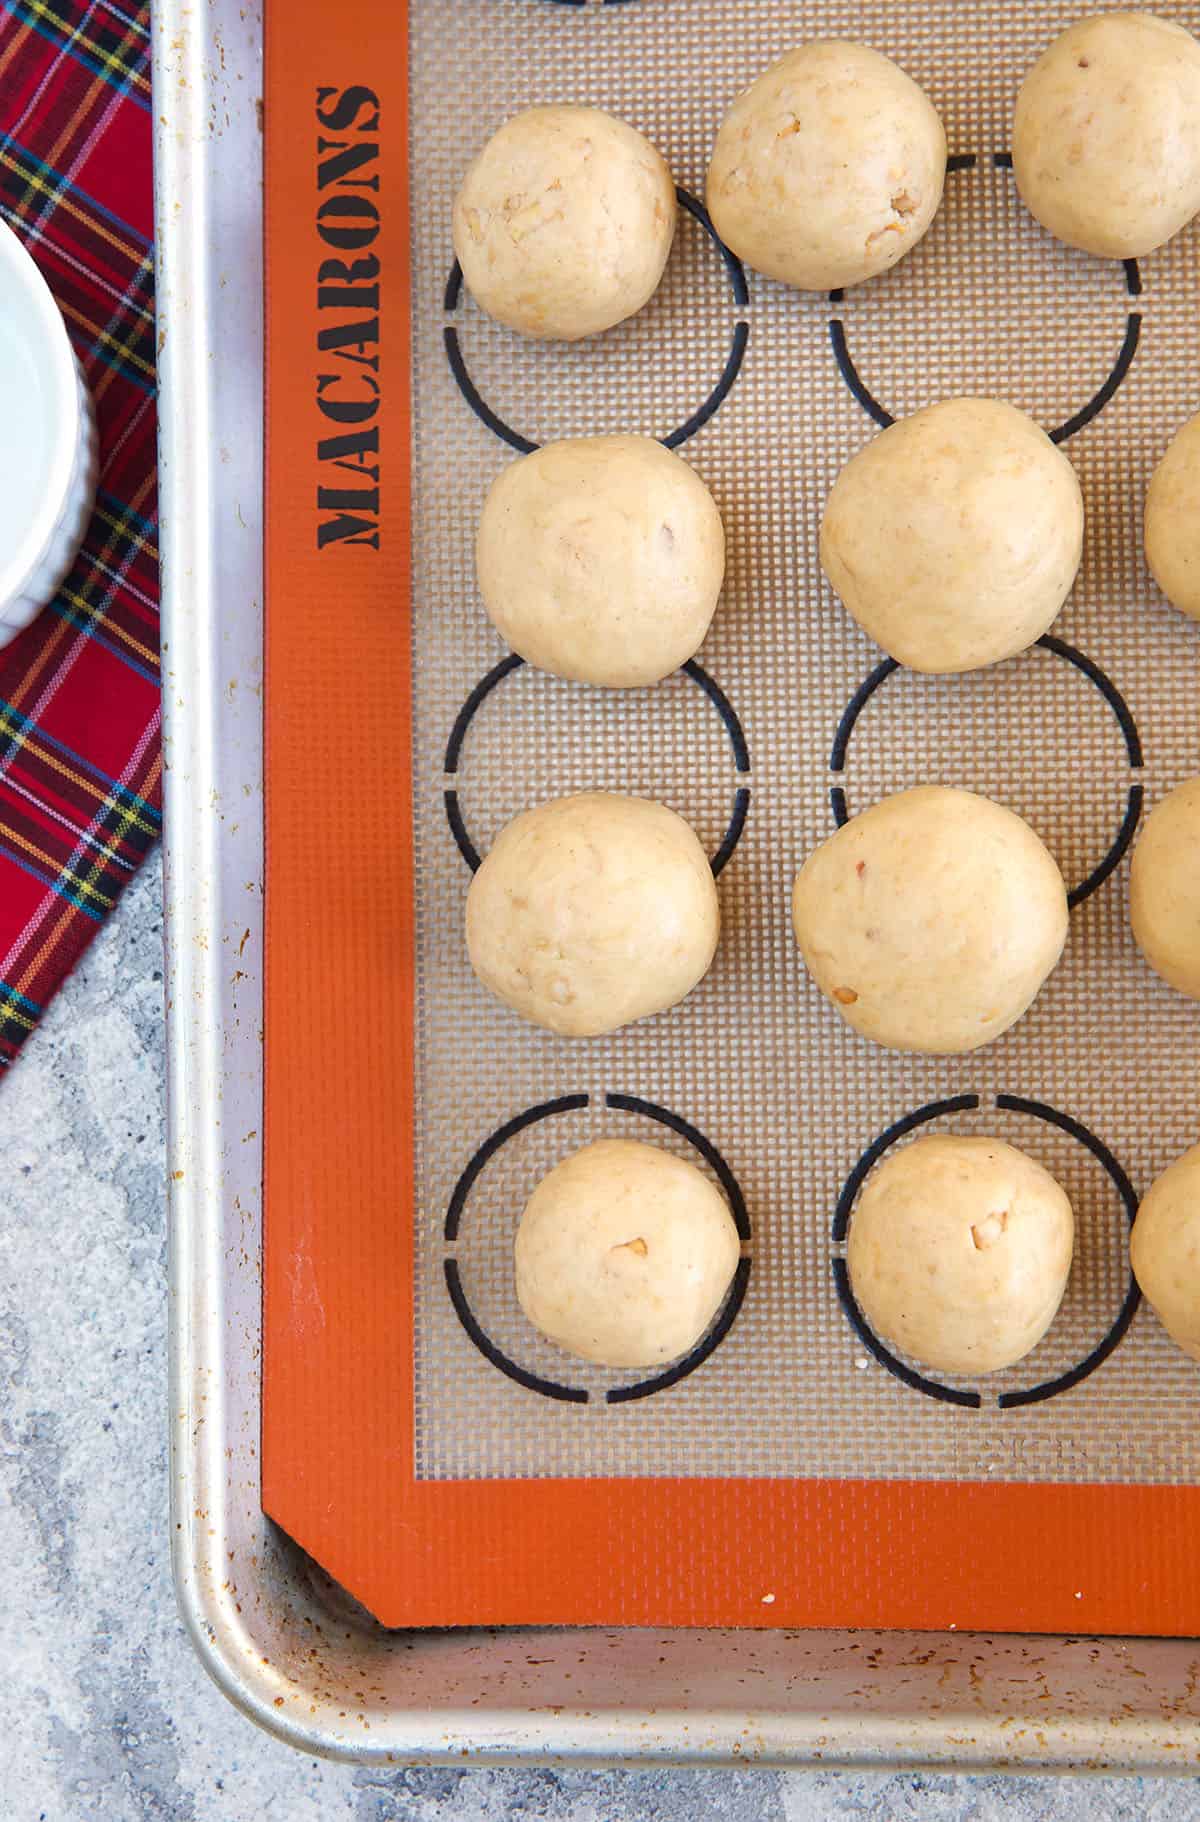 Peanut butter balls with no chocolate are spread out on a baking sheet.